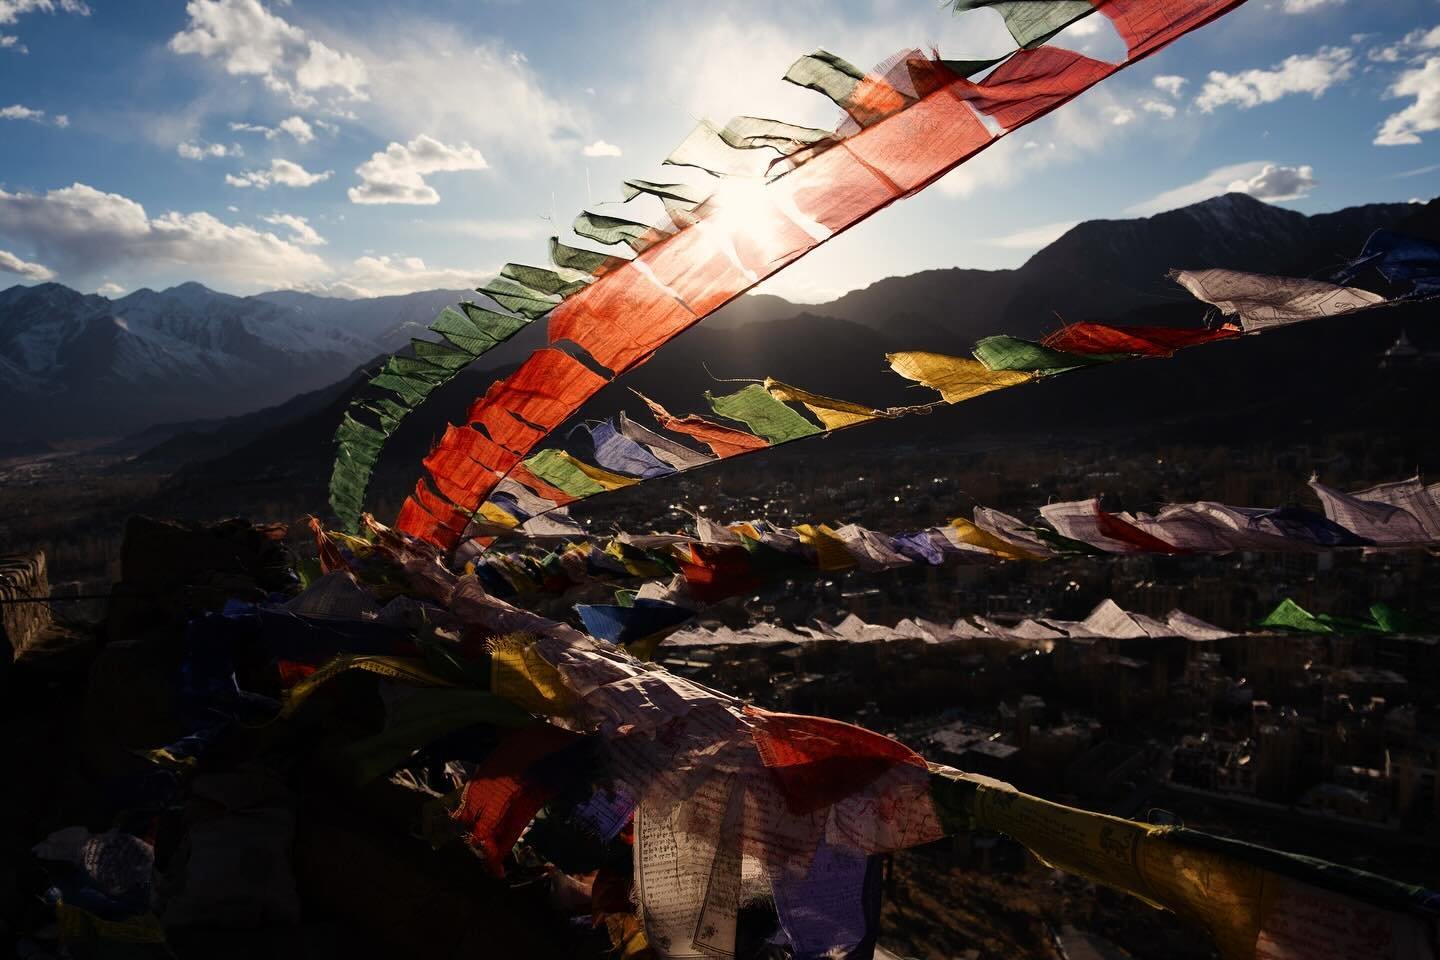 I was hypnotized by the sound of these prayer flags moving with the wind as the last ray of sun fell into the Himalayas &hellip; perched on the edge of a holy temple drinking tea and taking it in. It was absolutely beautiful. The five traditional col